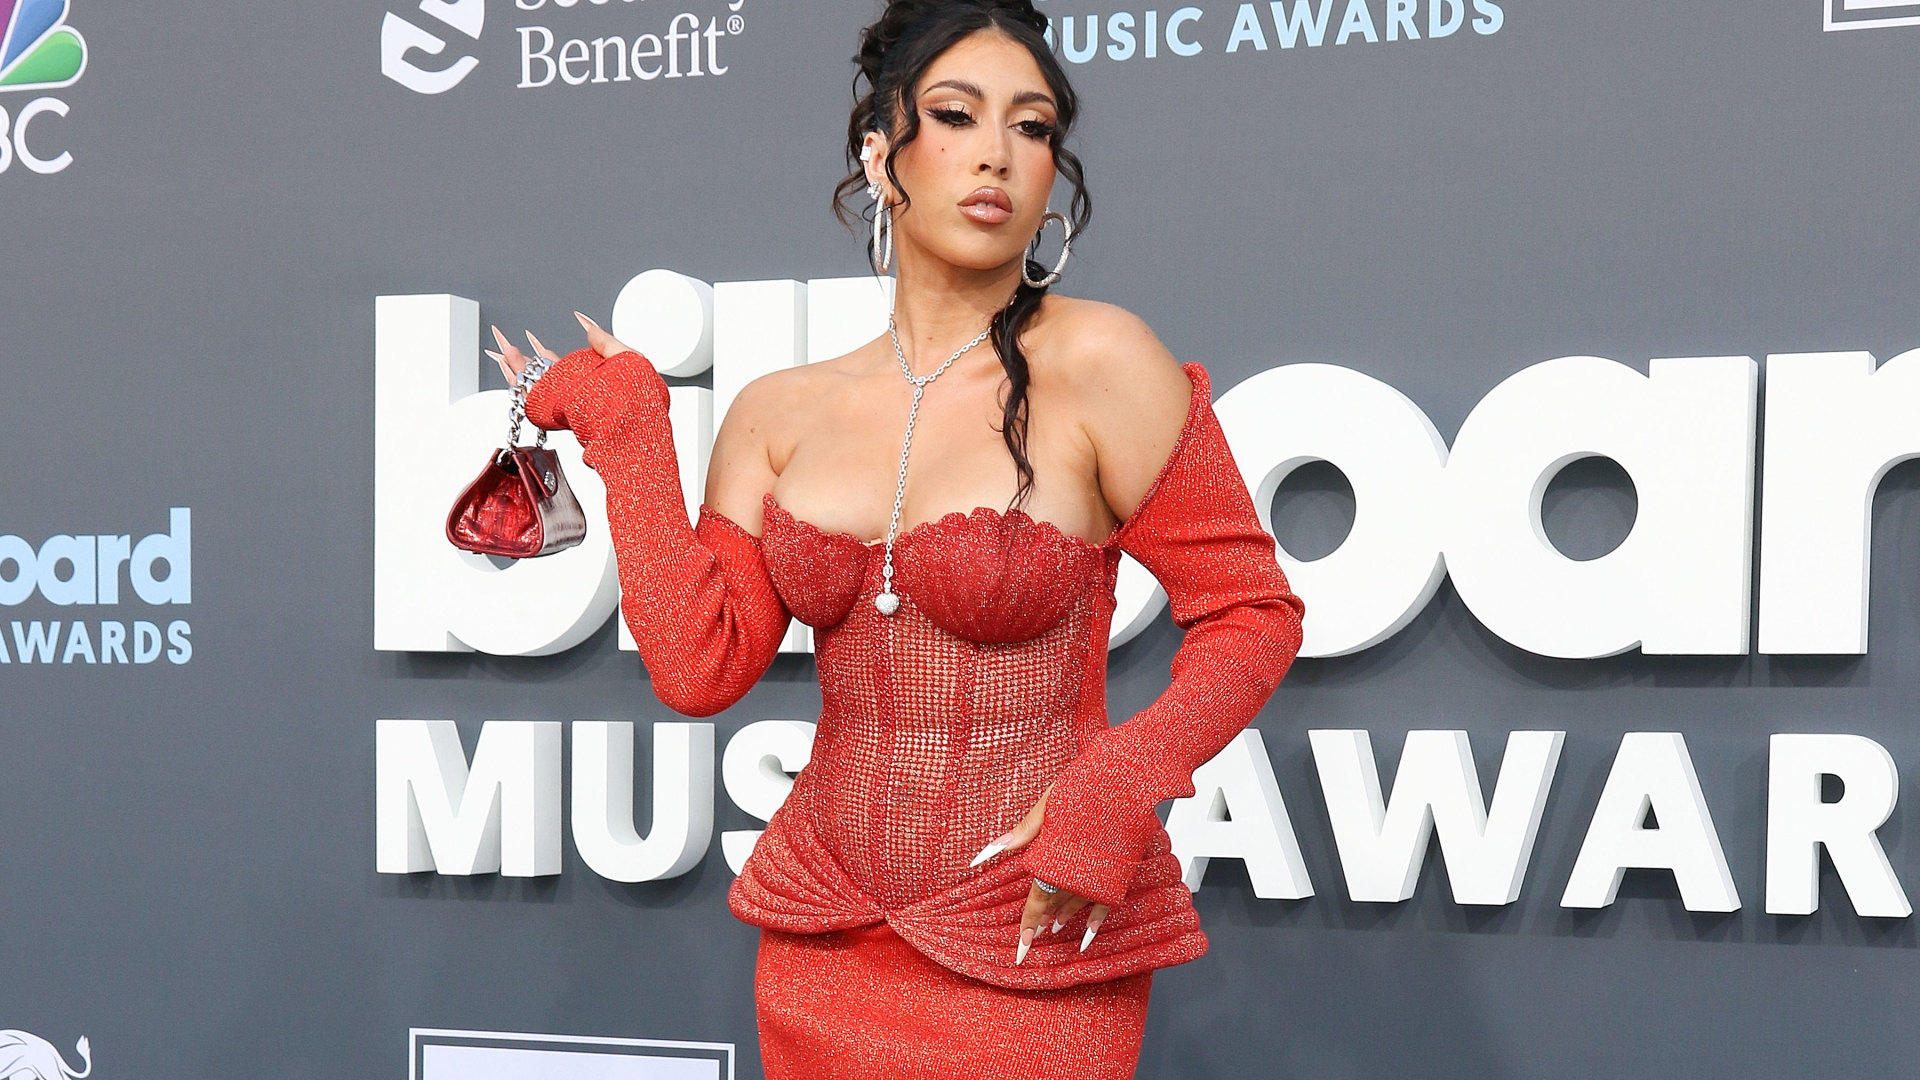 Kali Uchis and Don Toliver: What's the Truth About Their Relationship Status? 16